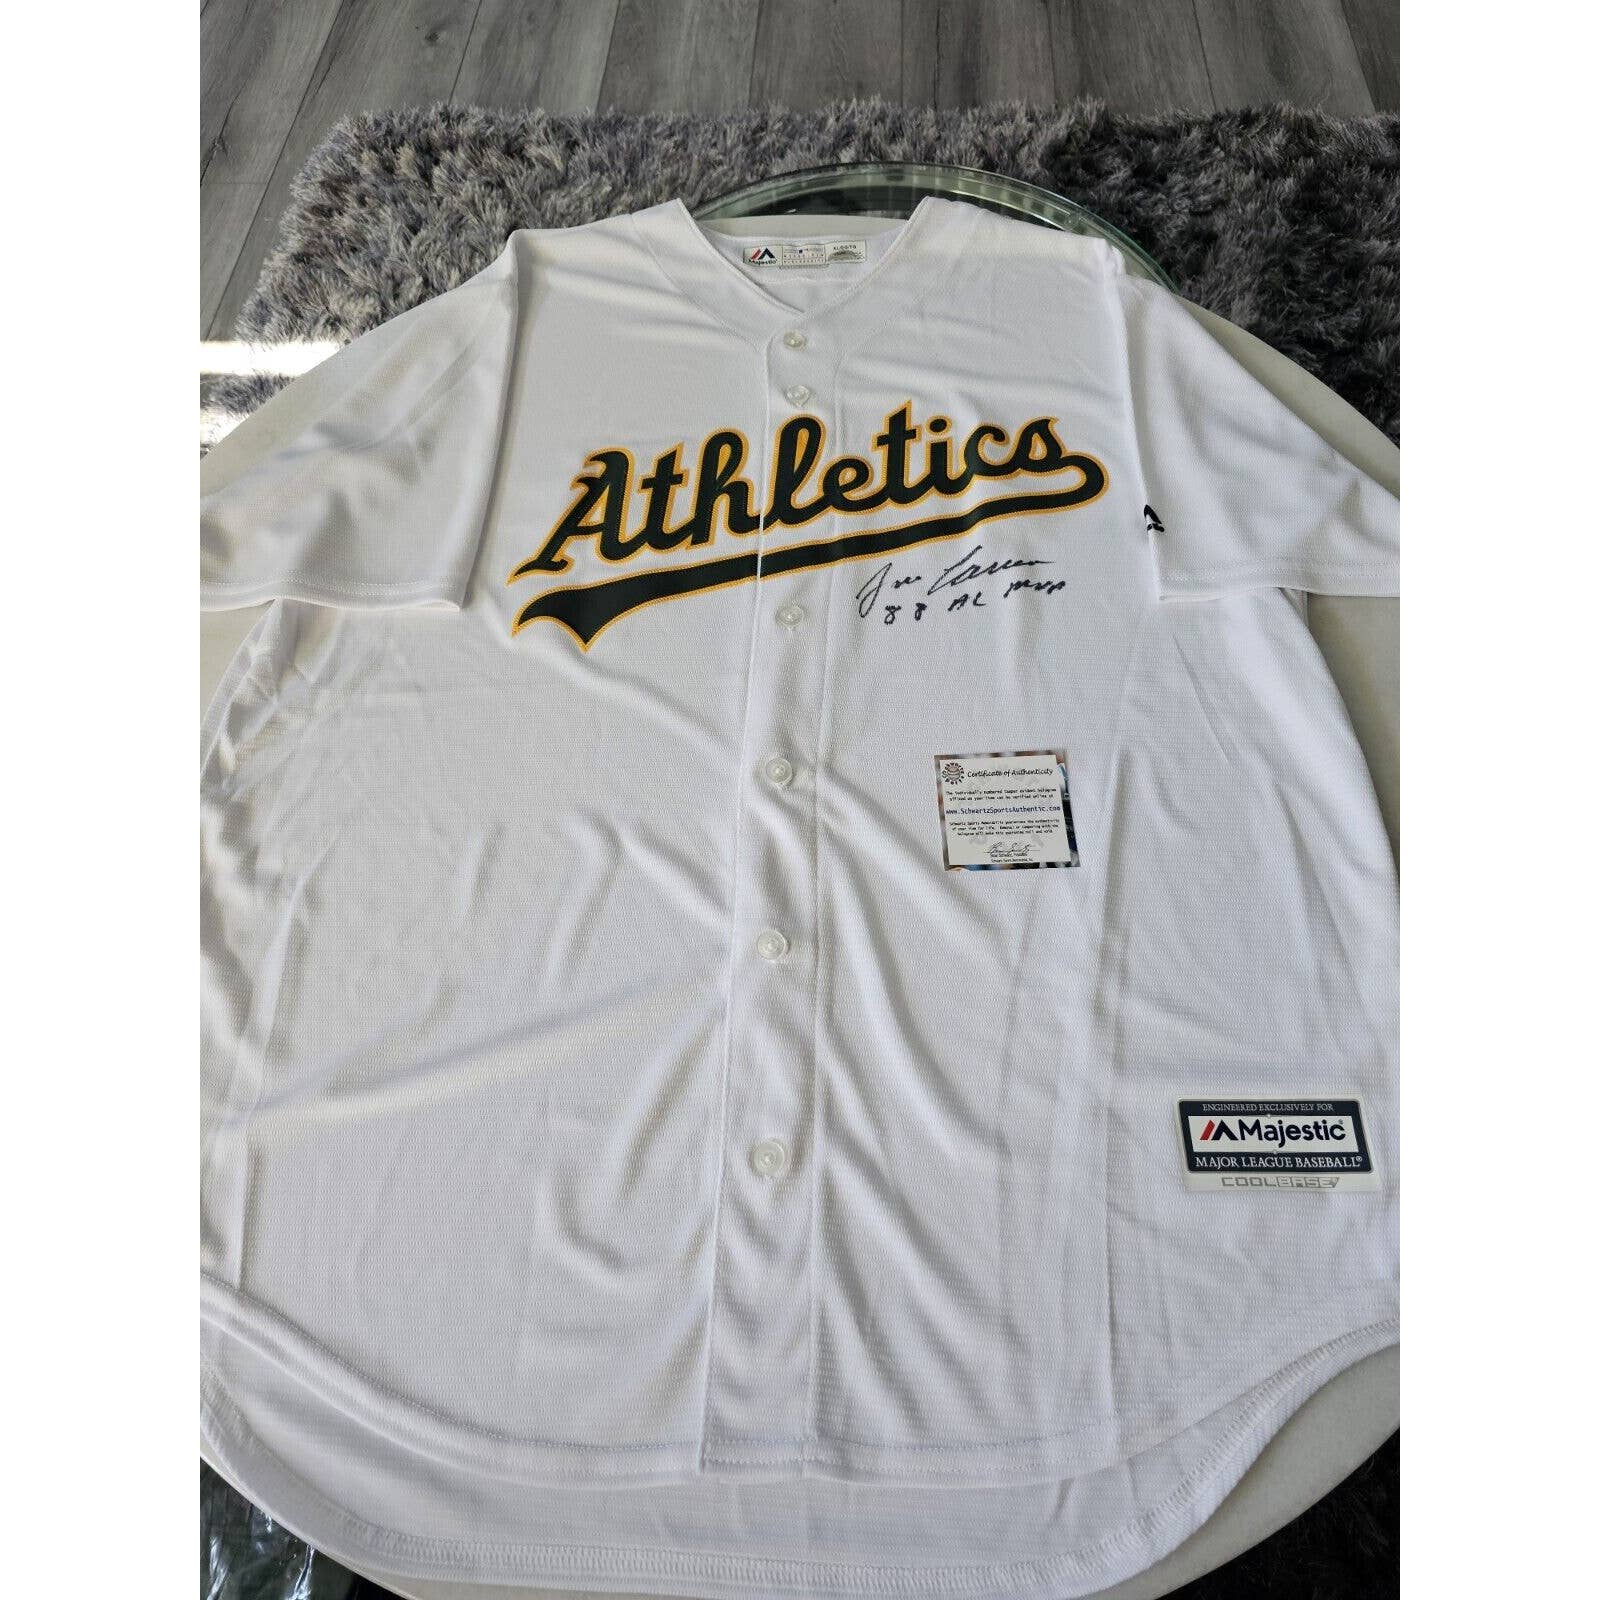 Jose Canseco Autographed/Signed Jersey COA Oakland Athletics A’s Bash Bros - TreasuresEvolved